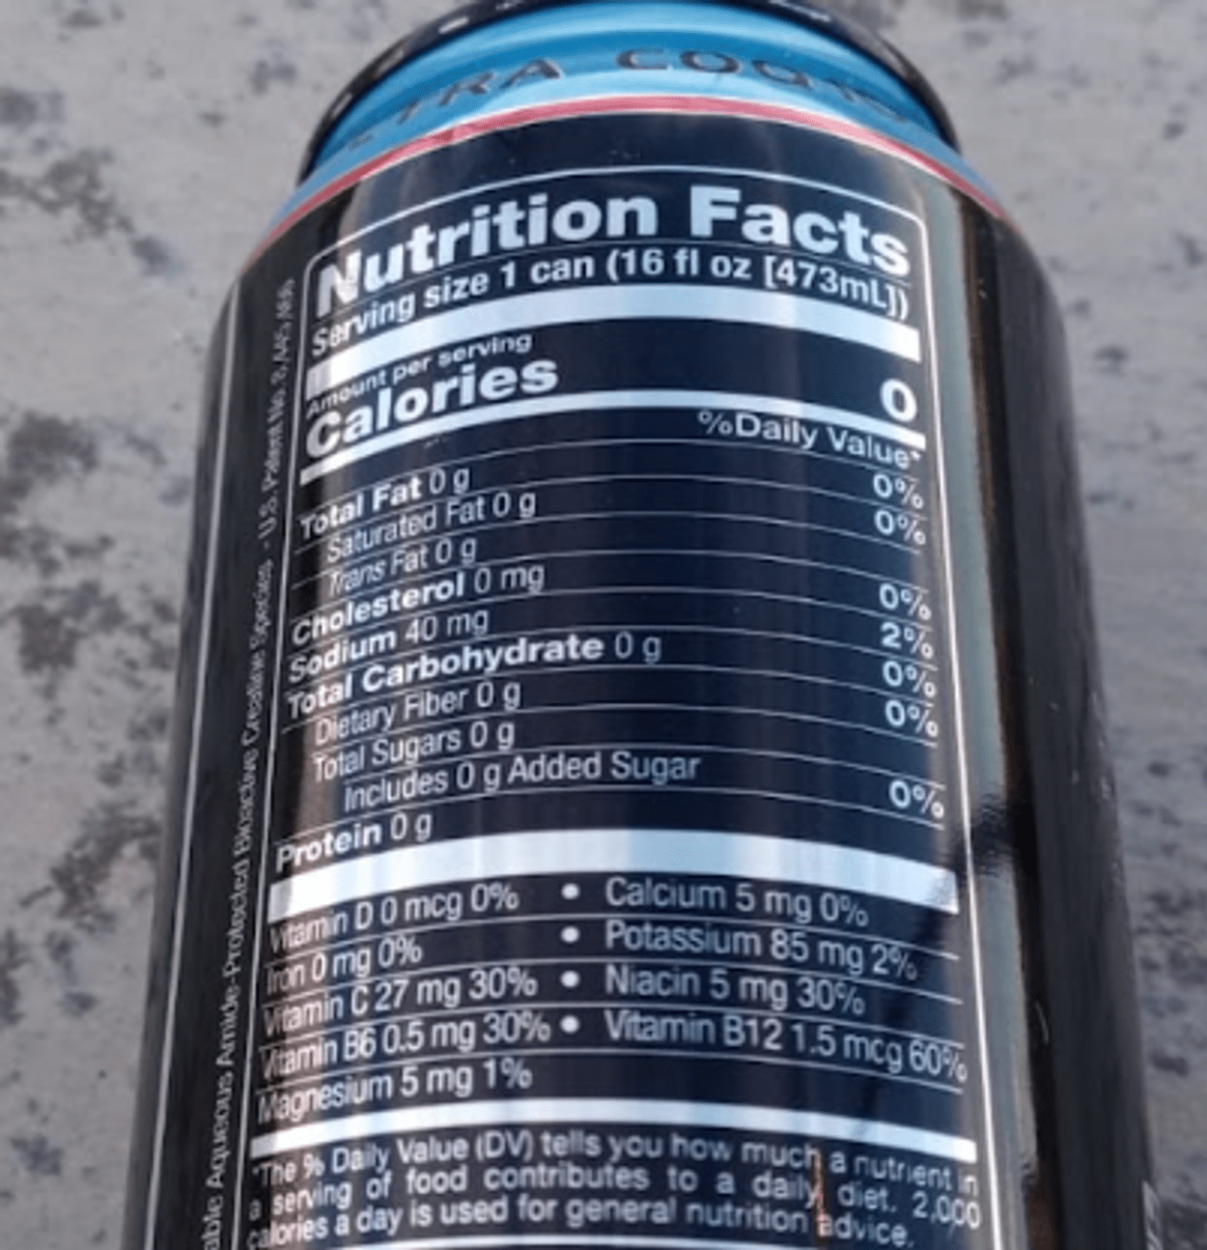 Nutrition facts of Bang Energy.